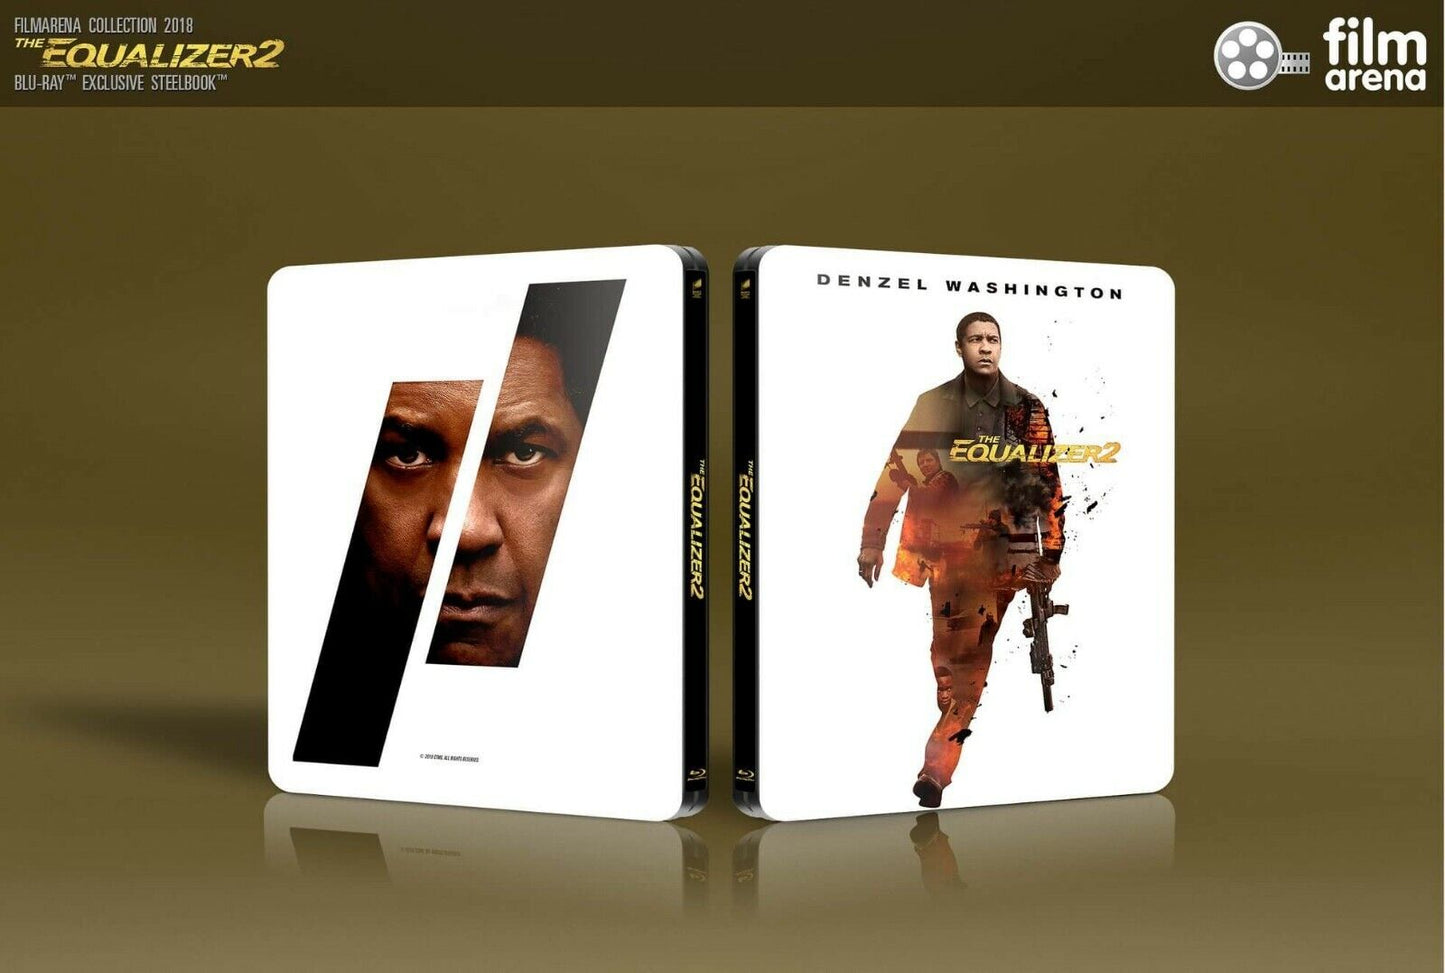 The Equalizer 2 Blu-ray Steelbook Filmarena Collection #111 E1 Lenticular XL Full Slip